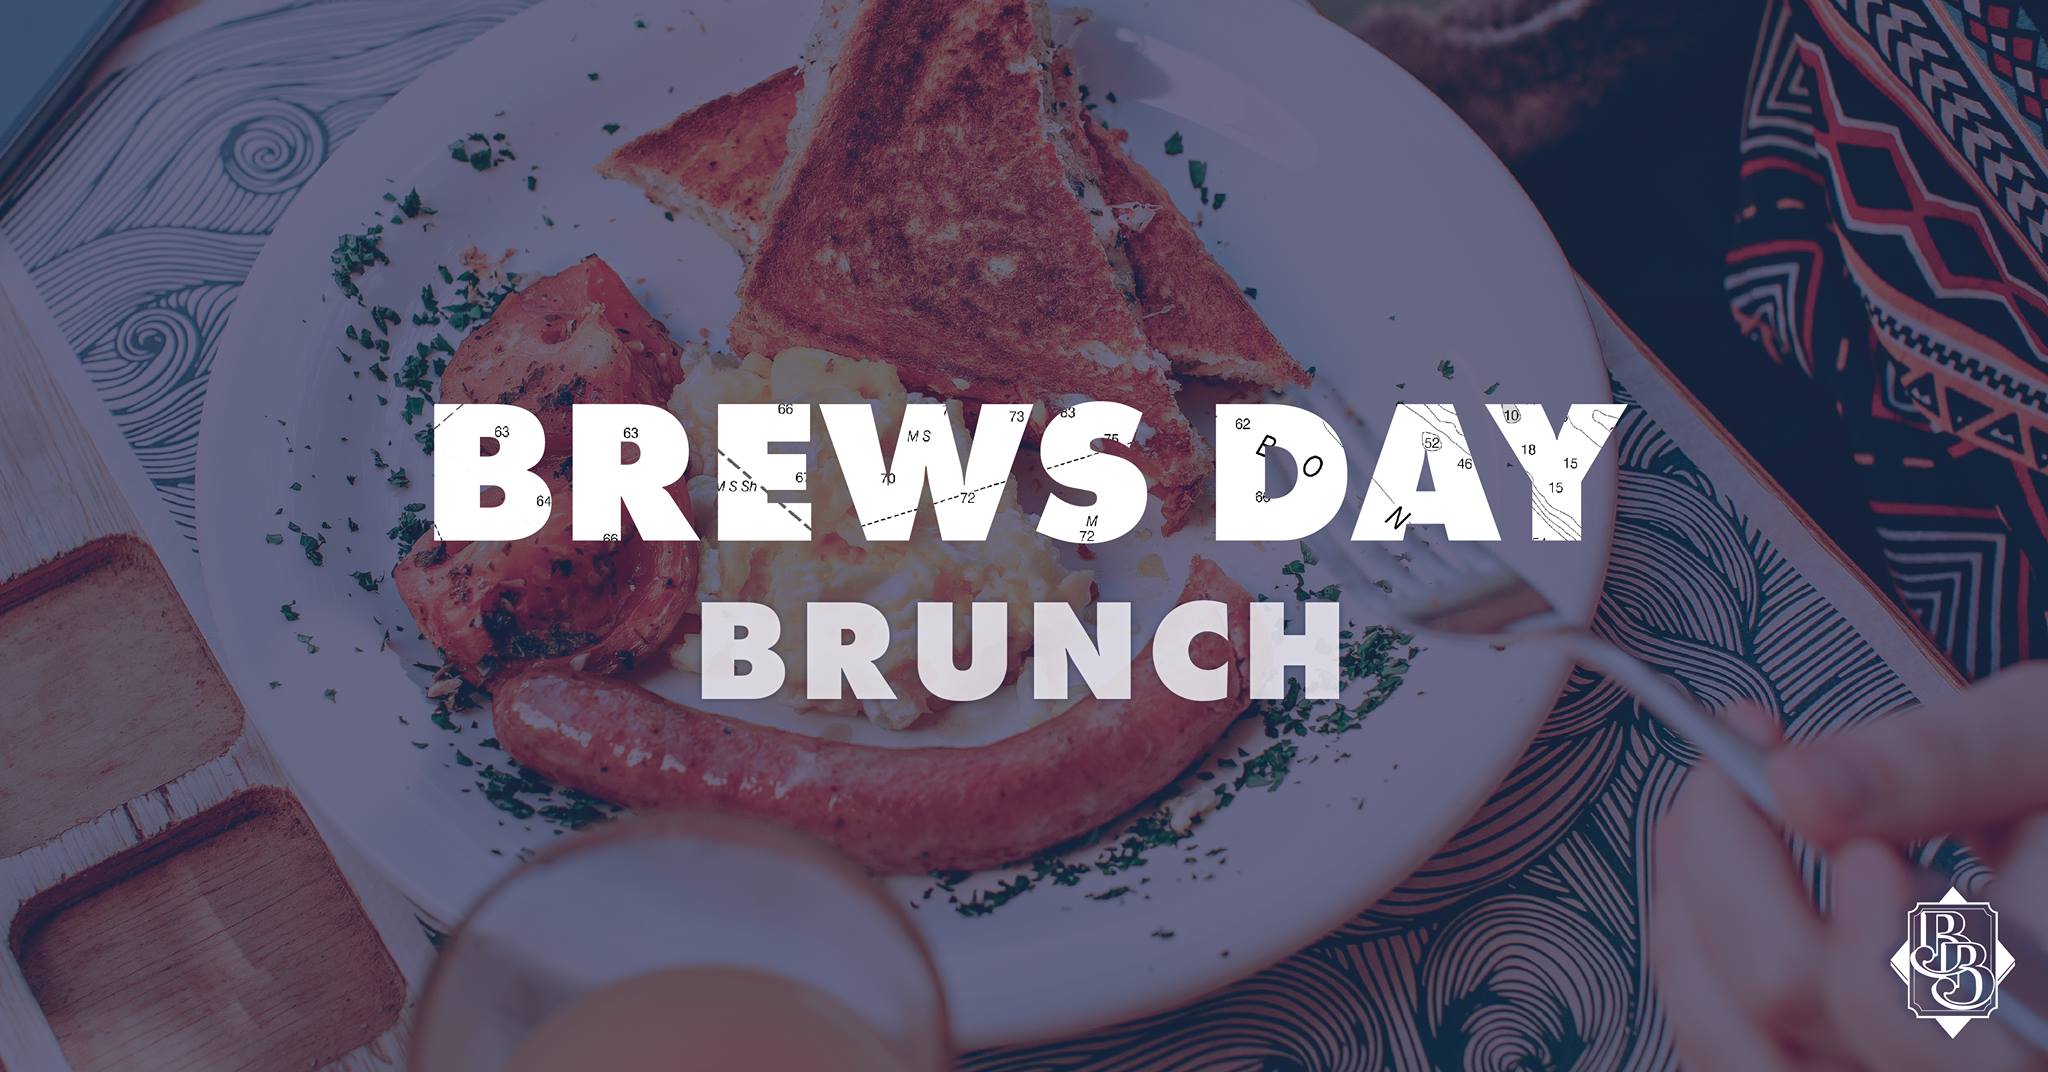 April Brews Day Events - Brews Day Brunch at Boundary Bay